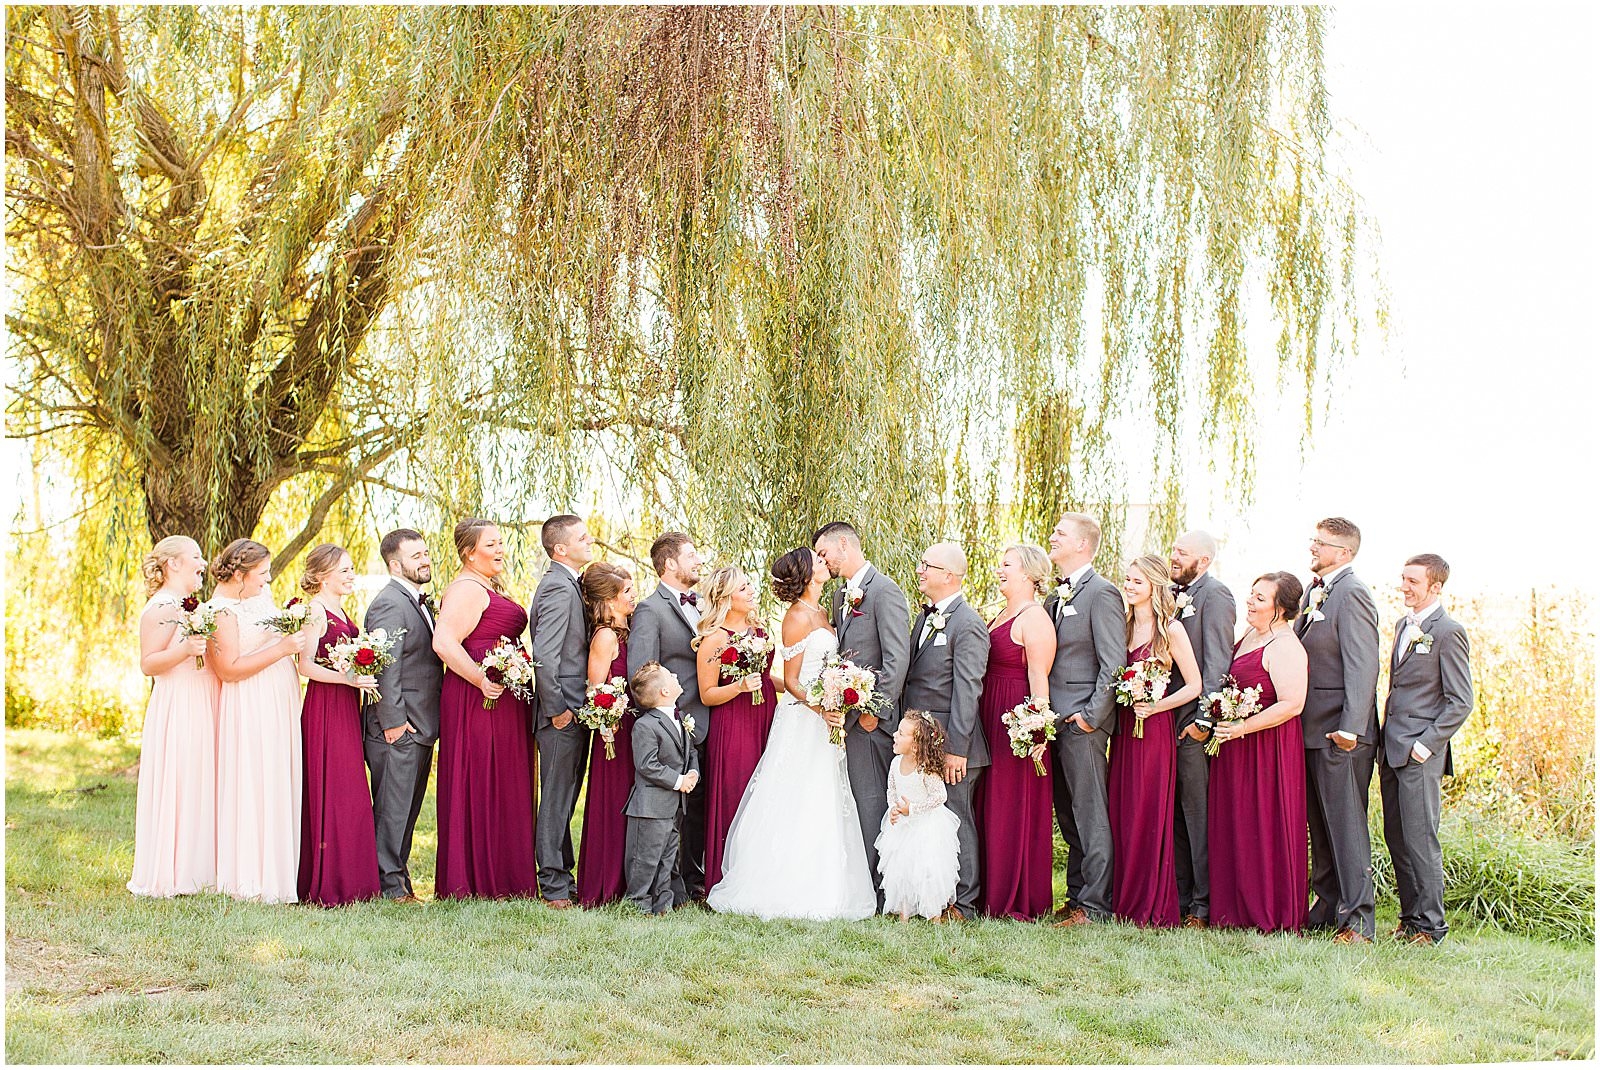 A Stunning Fall Wedding in Indianapolis, IN |. Sally and Andrew | Bret and Brandie Photography 0097.jpg